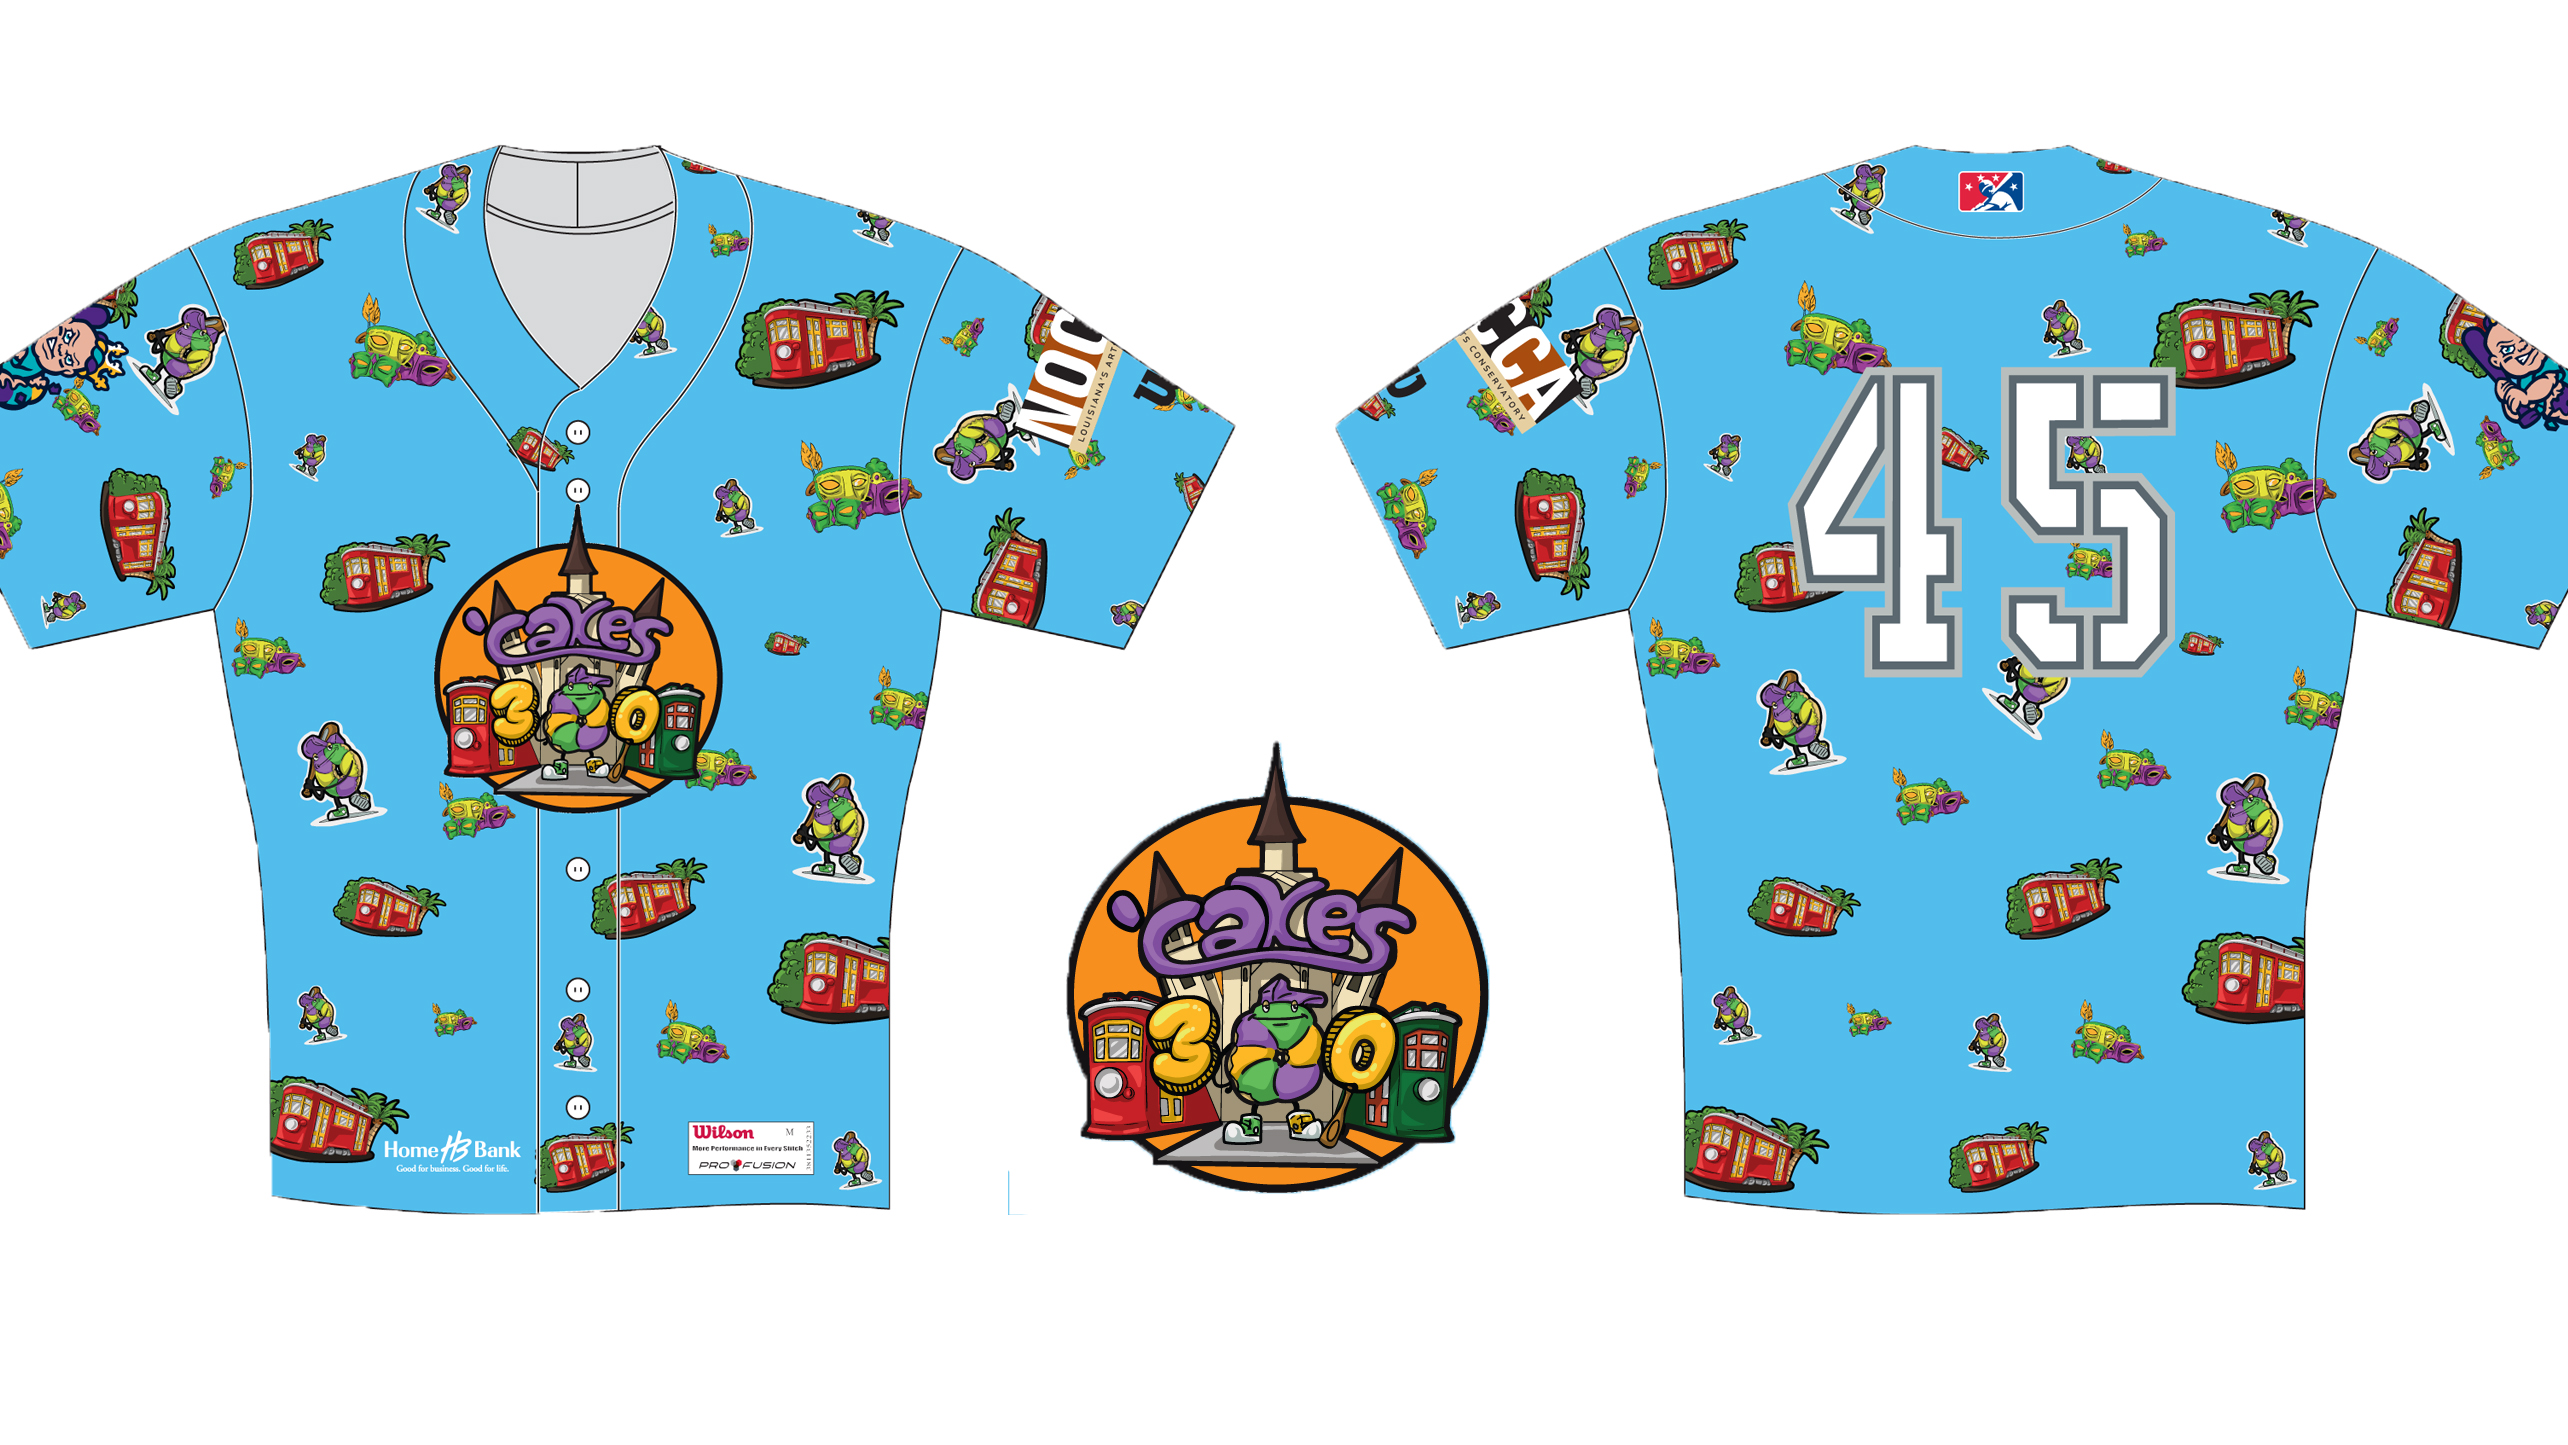 new orleans baby cakes jersey